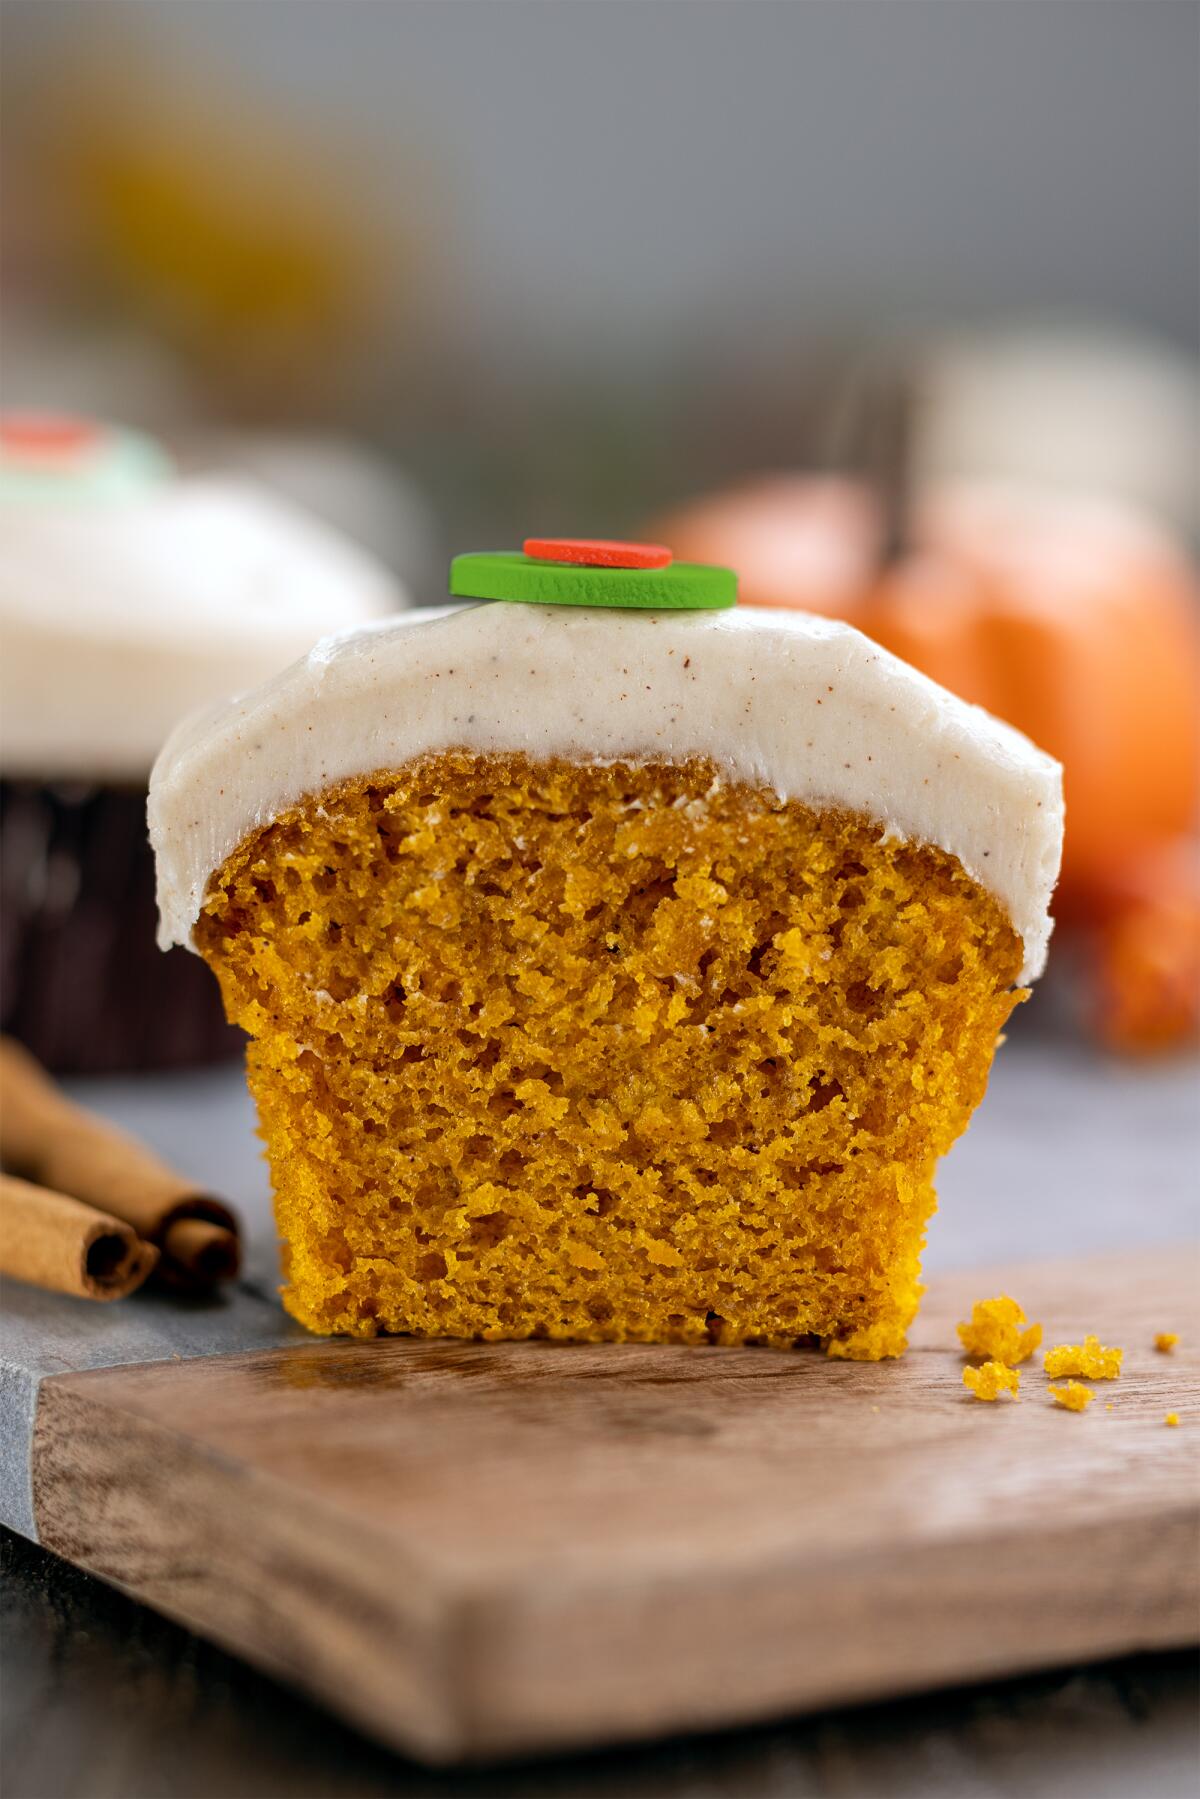 A pumpkin cupcake at Sprinkles, topped with cinnamon cream cheese frosting.